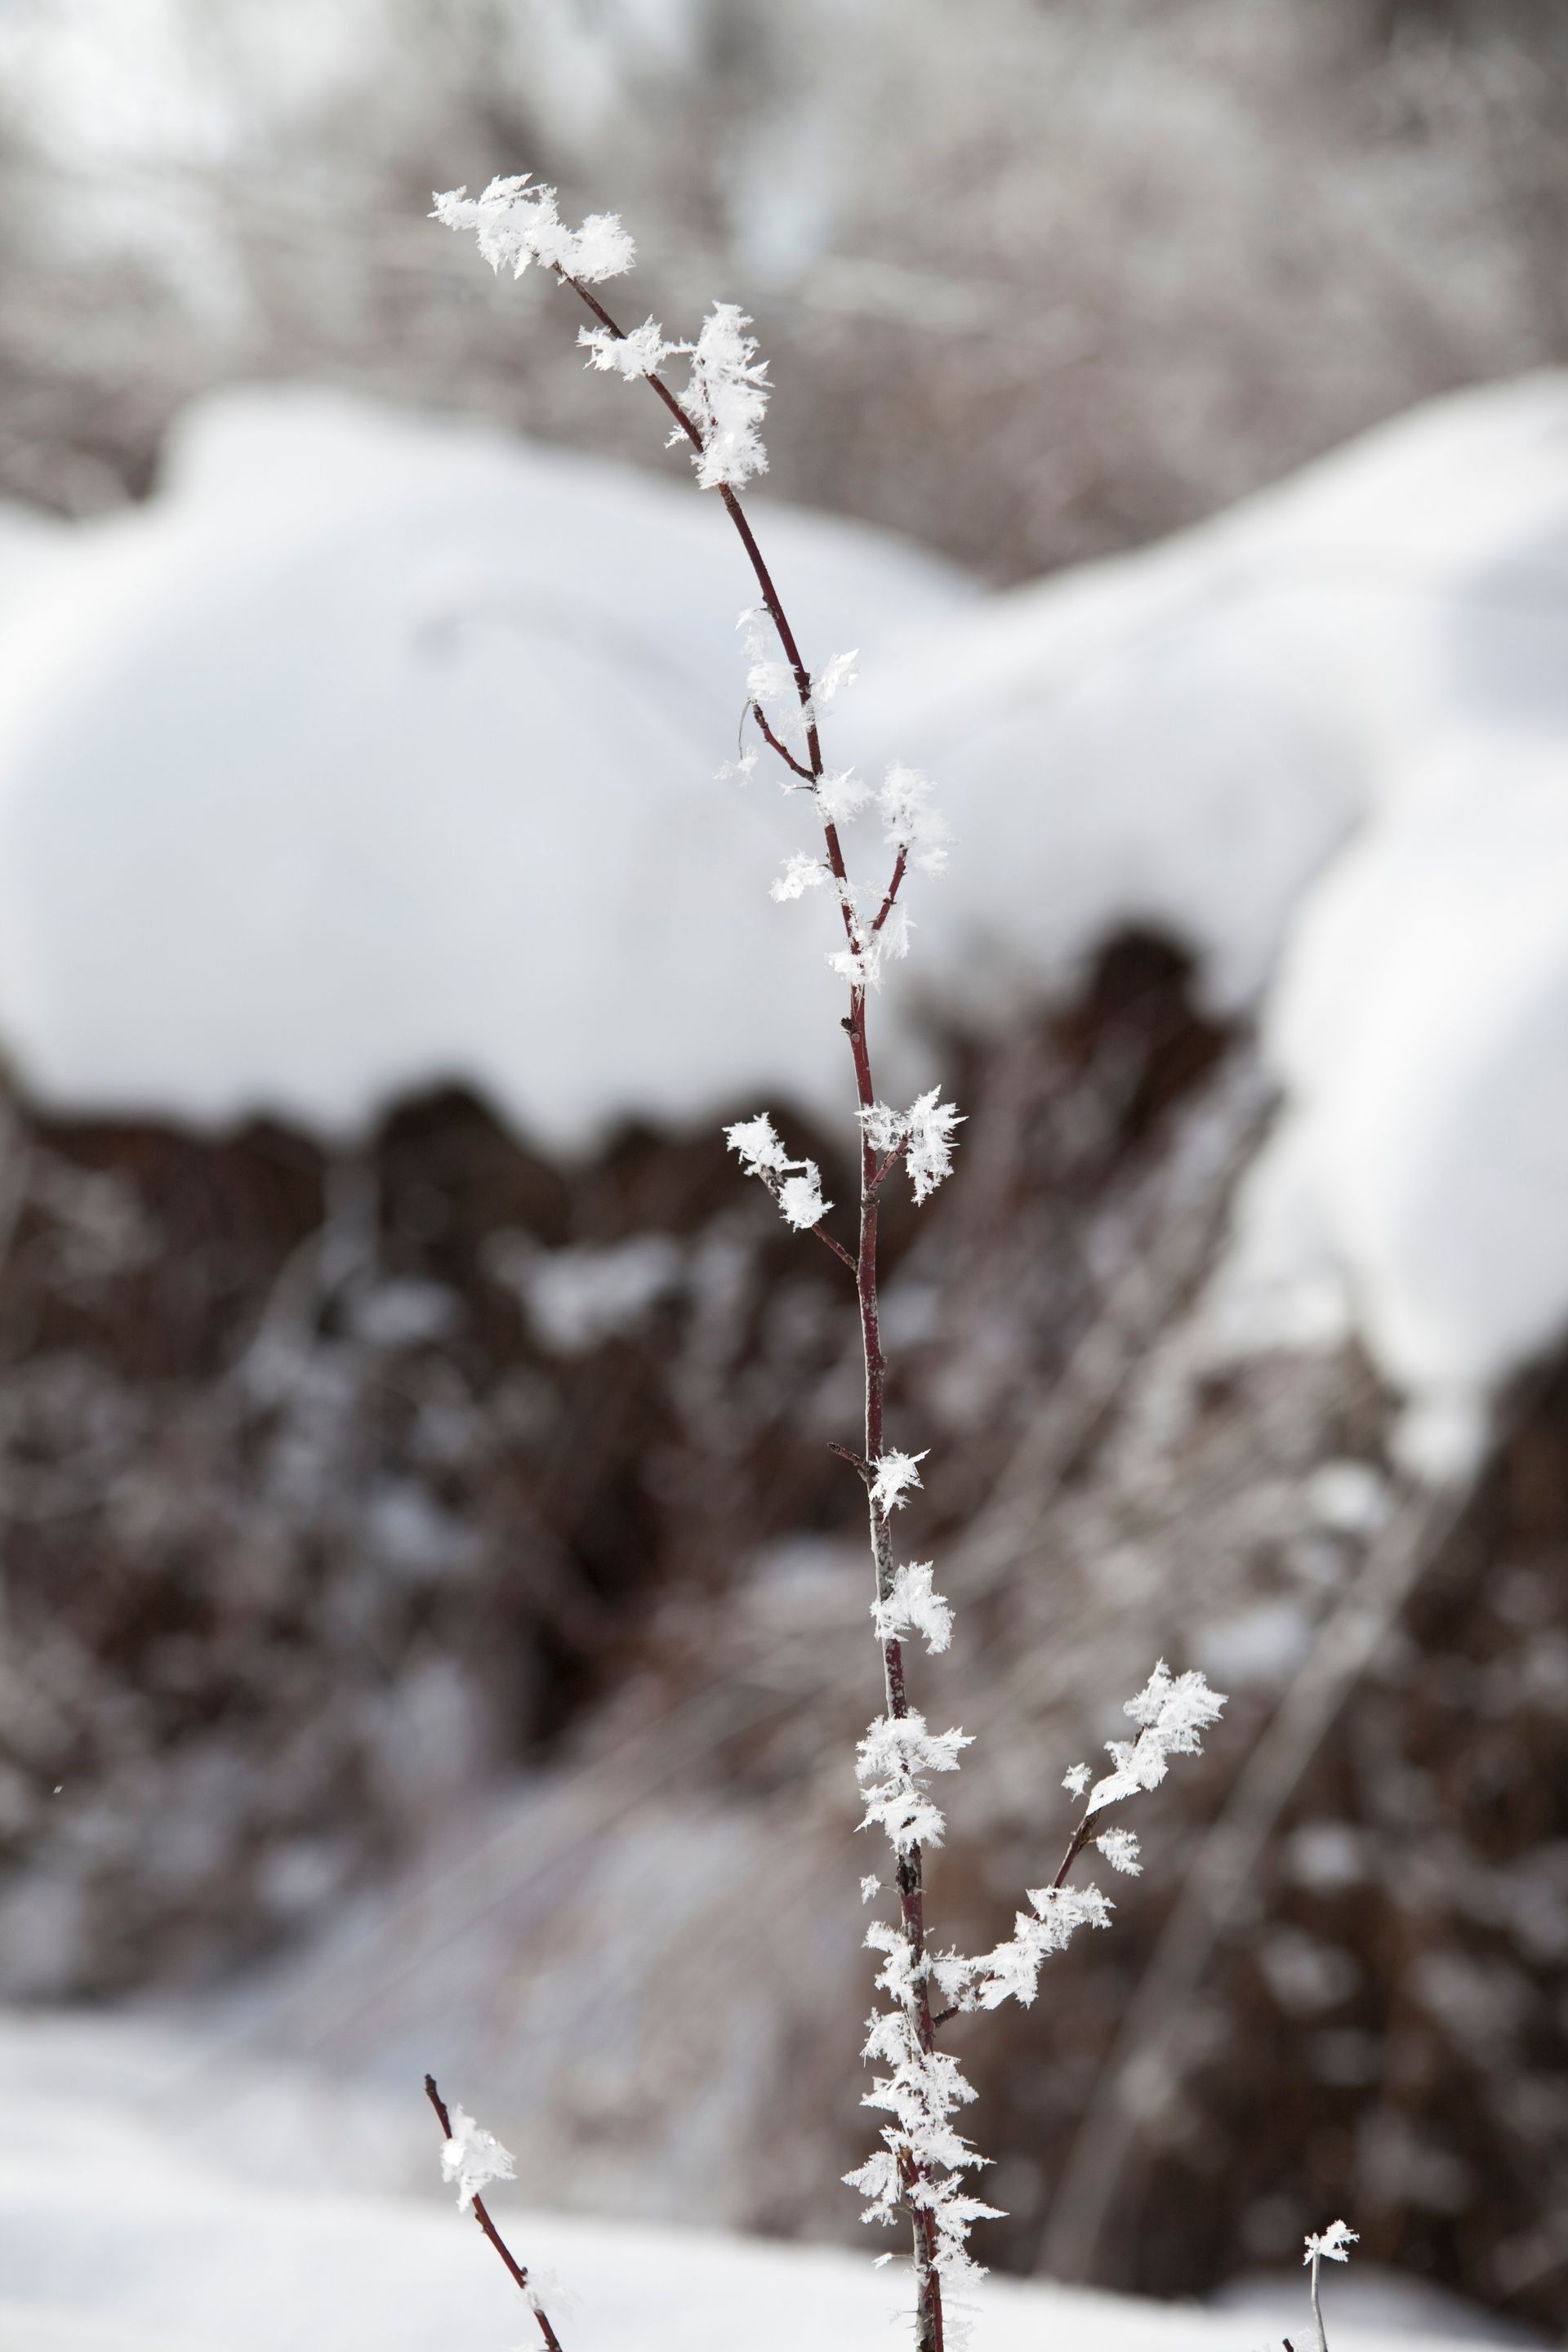 Frost and snow on a plant in winter.  